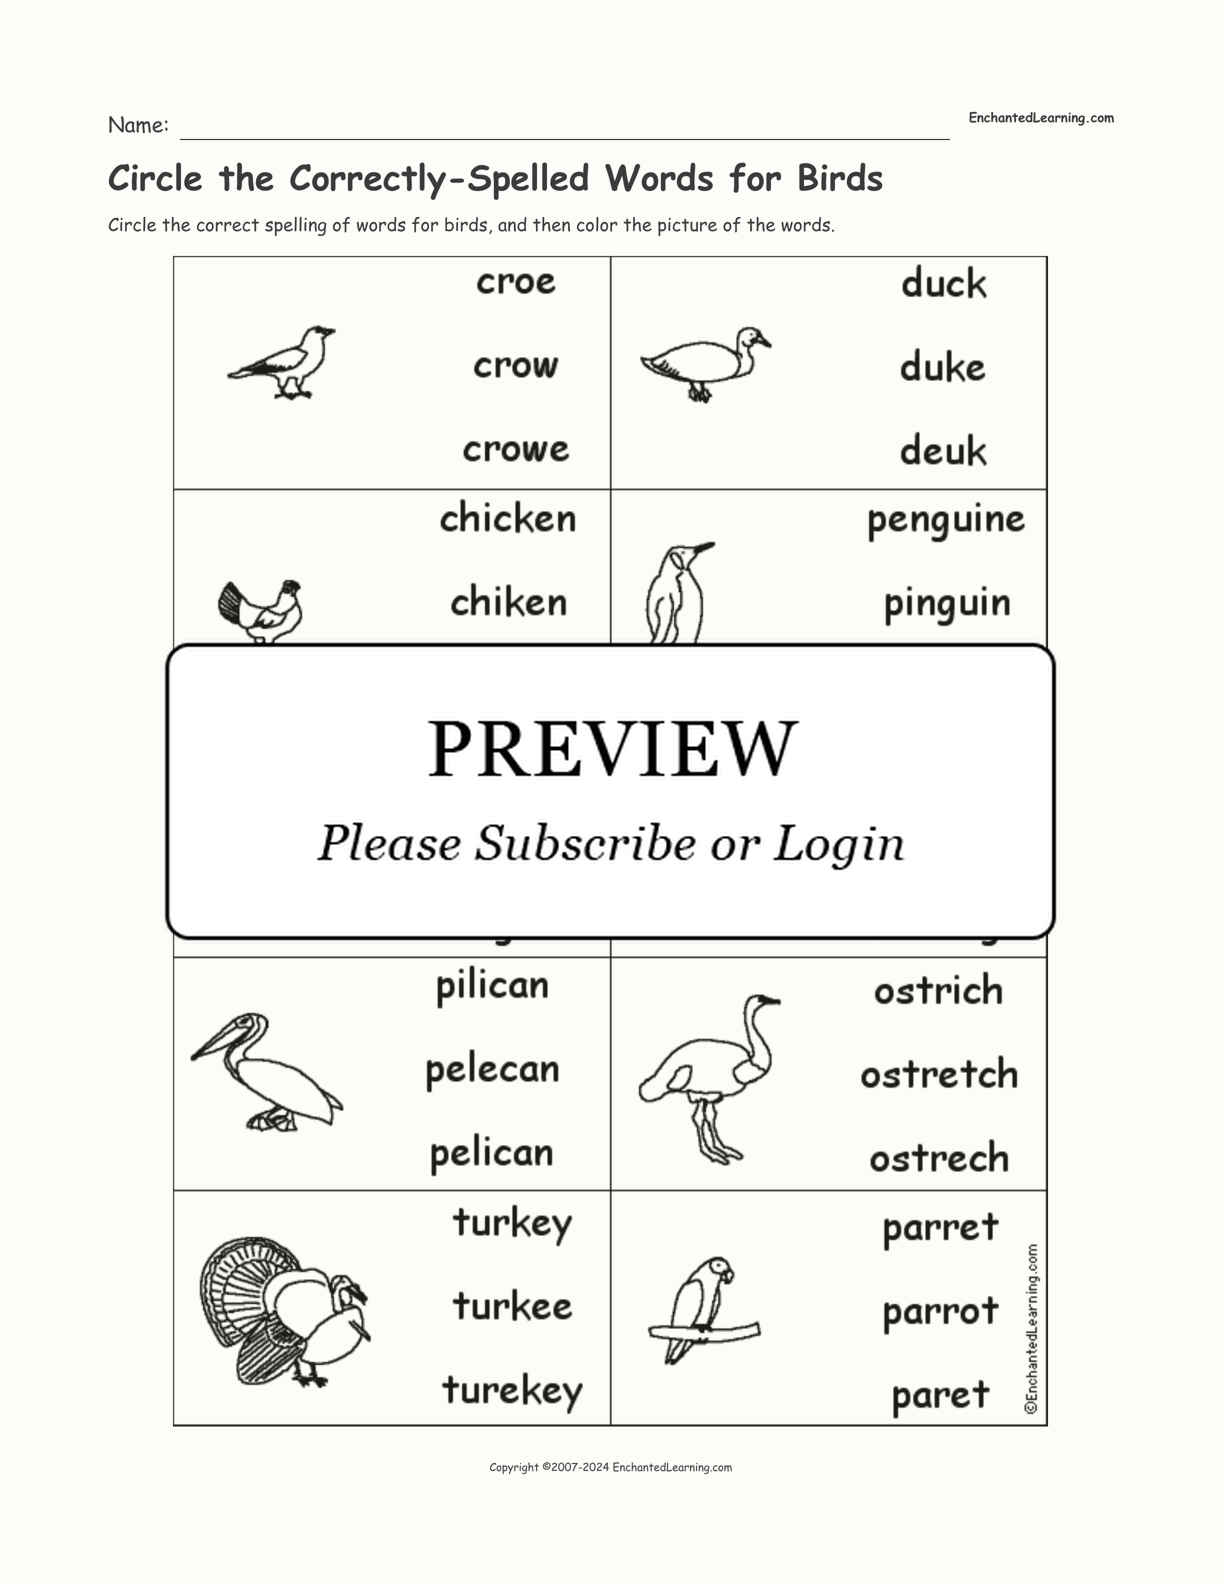 Circle the Correctly-Spelled Words for Birds interactive worksheet page 1